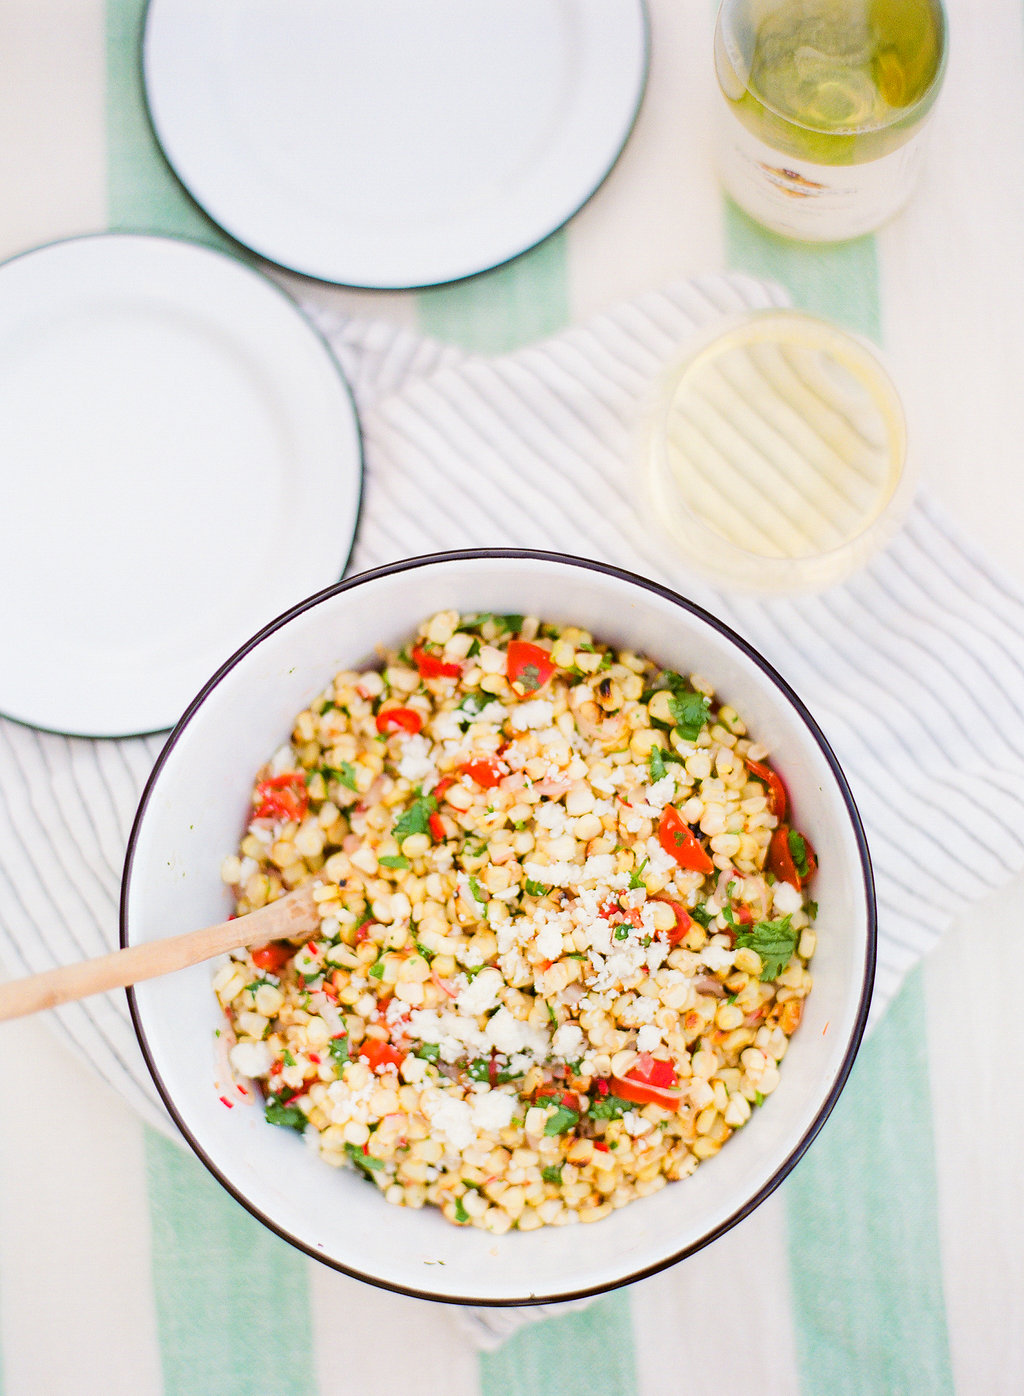 Pair this delicious charred corn salad #recipe with some Kendall-Jackson Vintner's Reserve Pinot Gris for the ultimate summer palette. No joke, it's like they were meant to be together. The sweetness from the corn brings out the flavors in the wine and BOOM, game over!